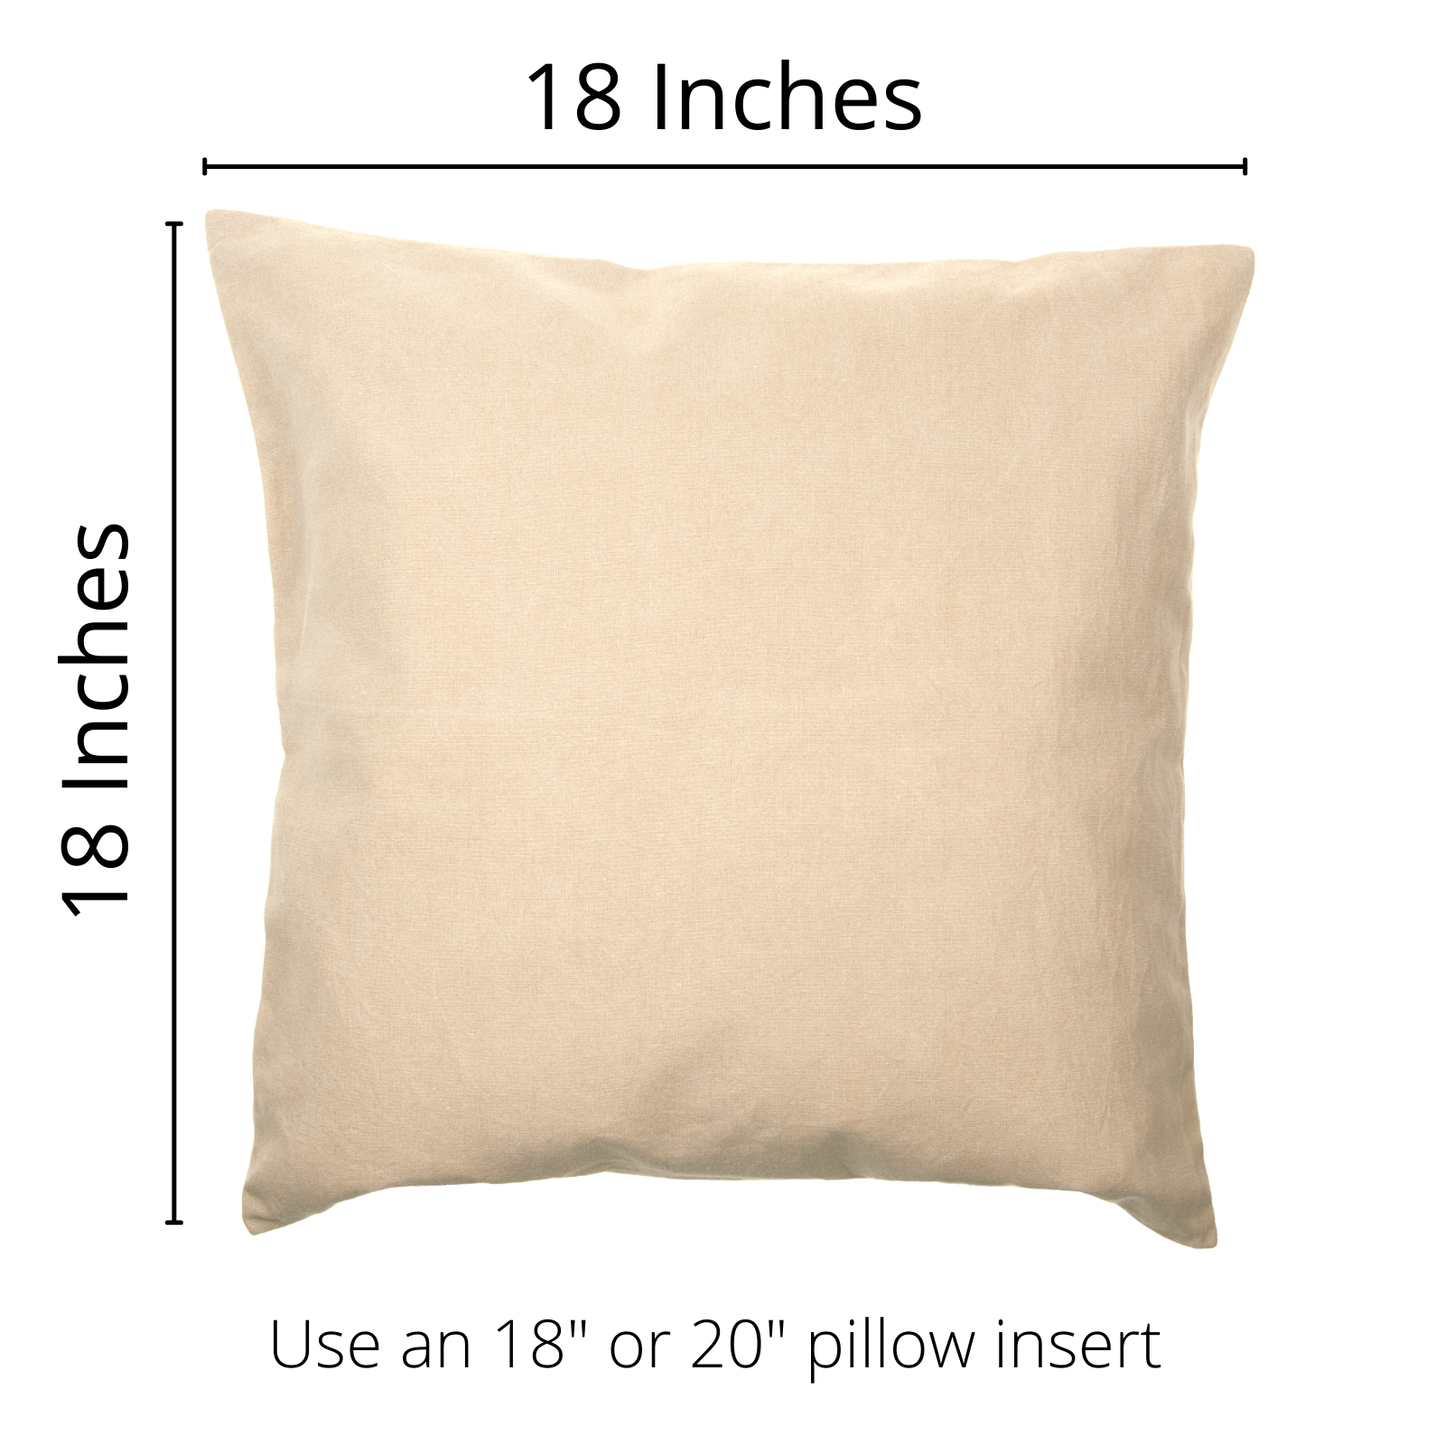 Land That I Love Pillow Cover